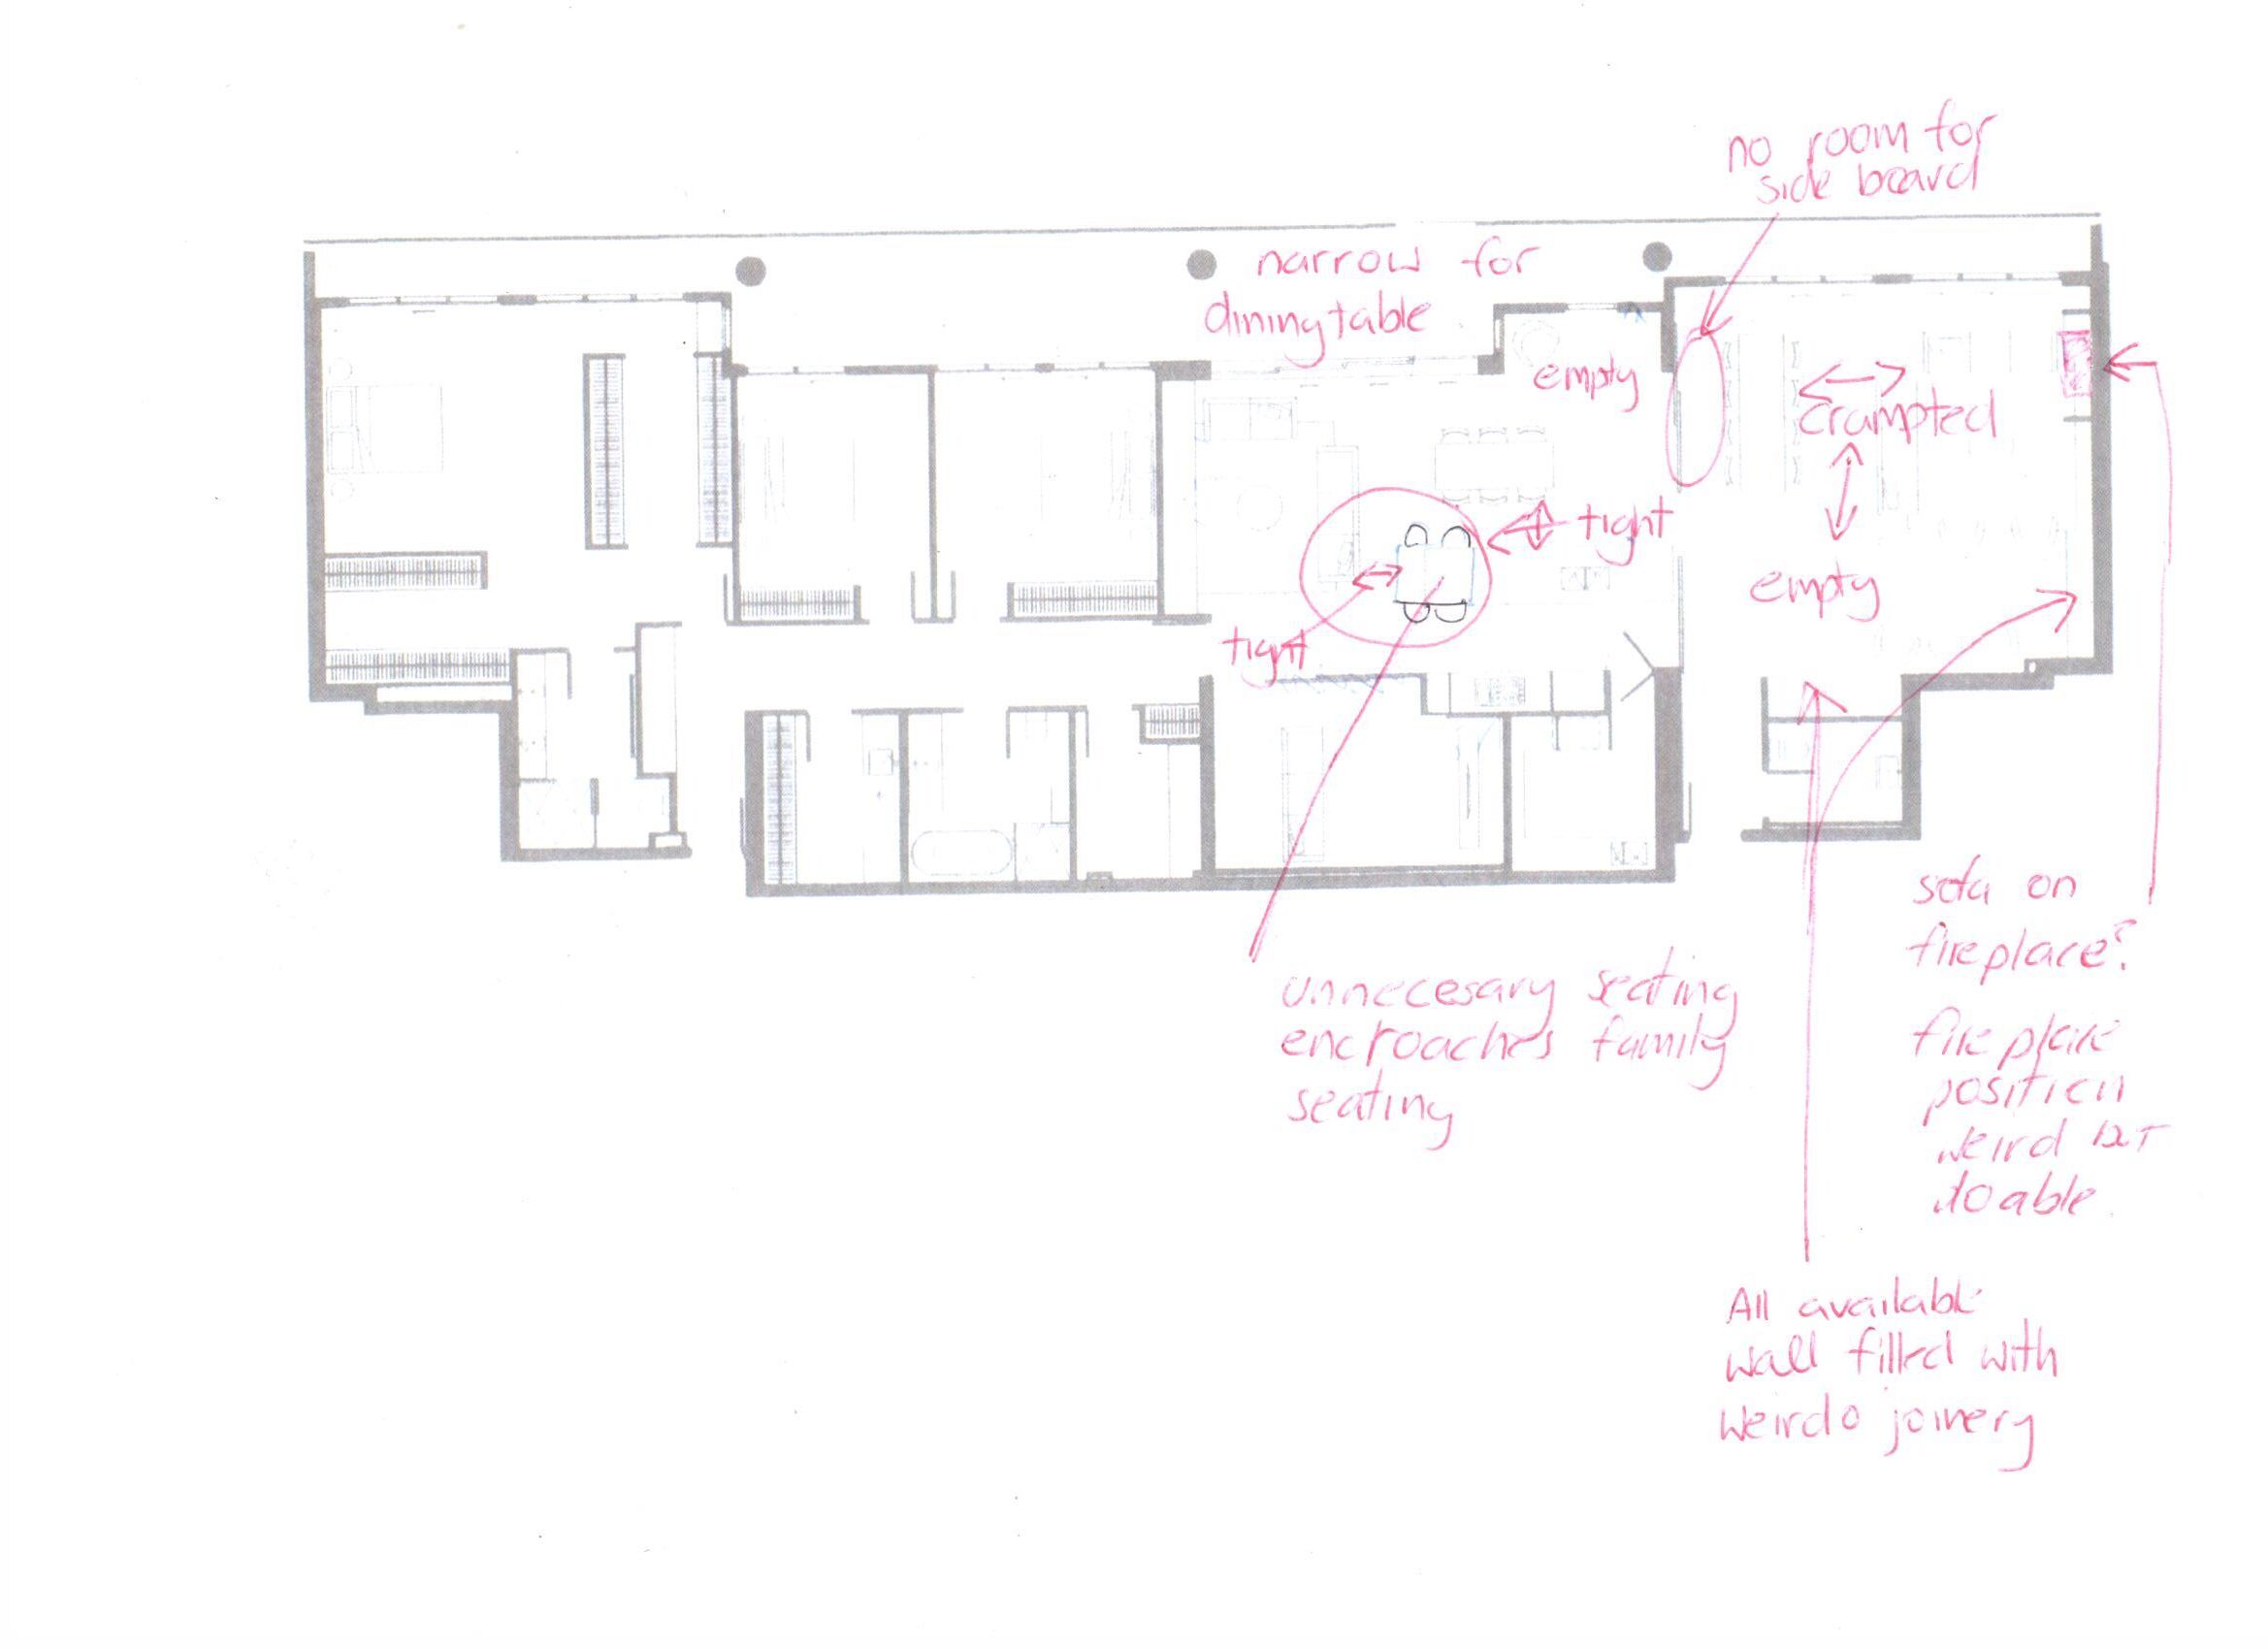  journey-home-interiors-griffith-downsizing-obstacles-floor-plan-with-red-pen-modifications